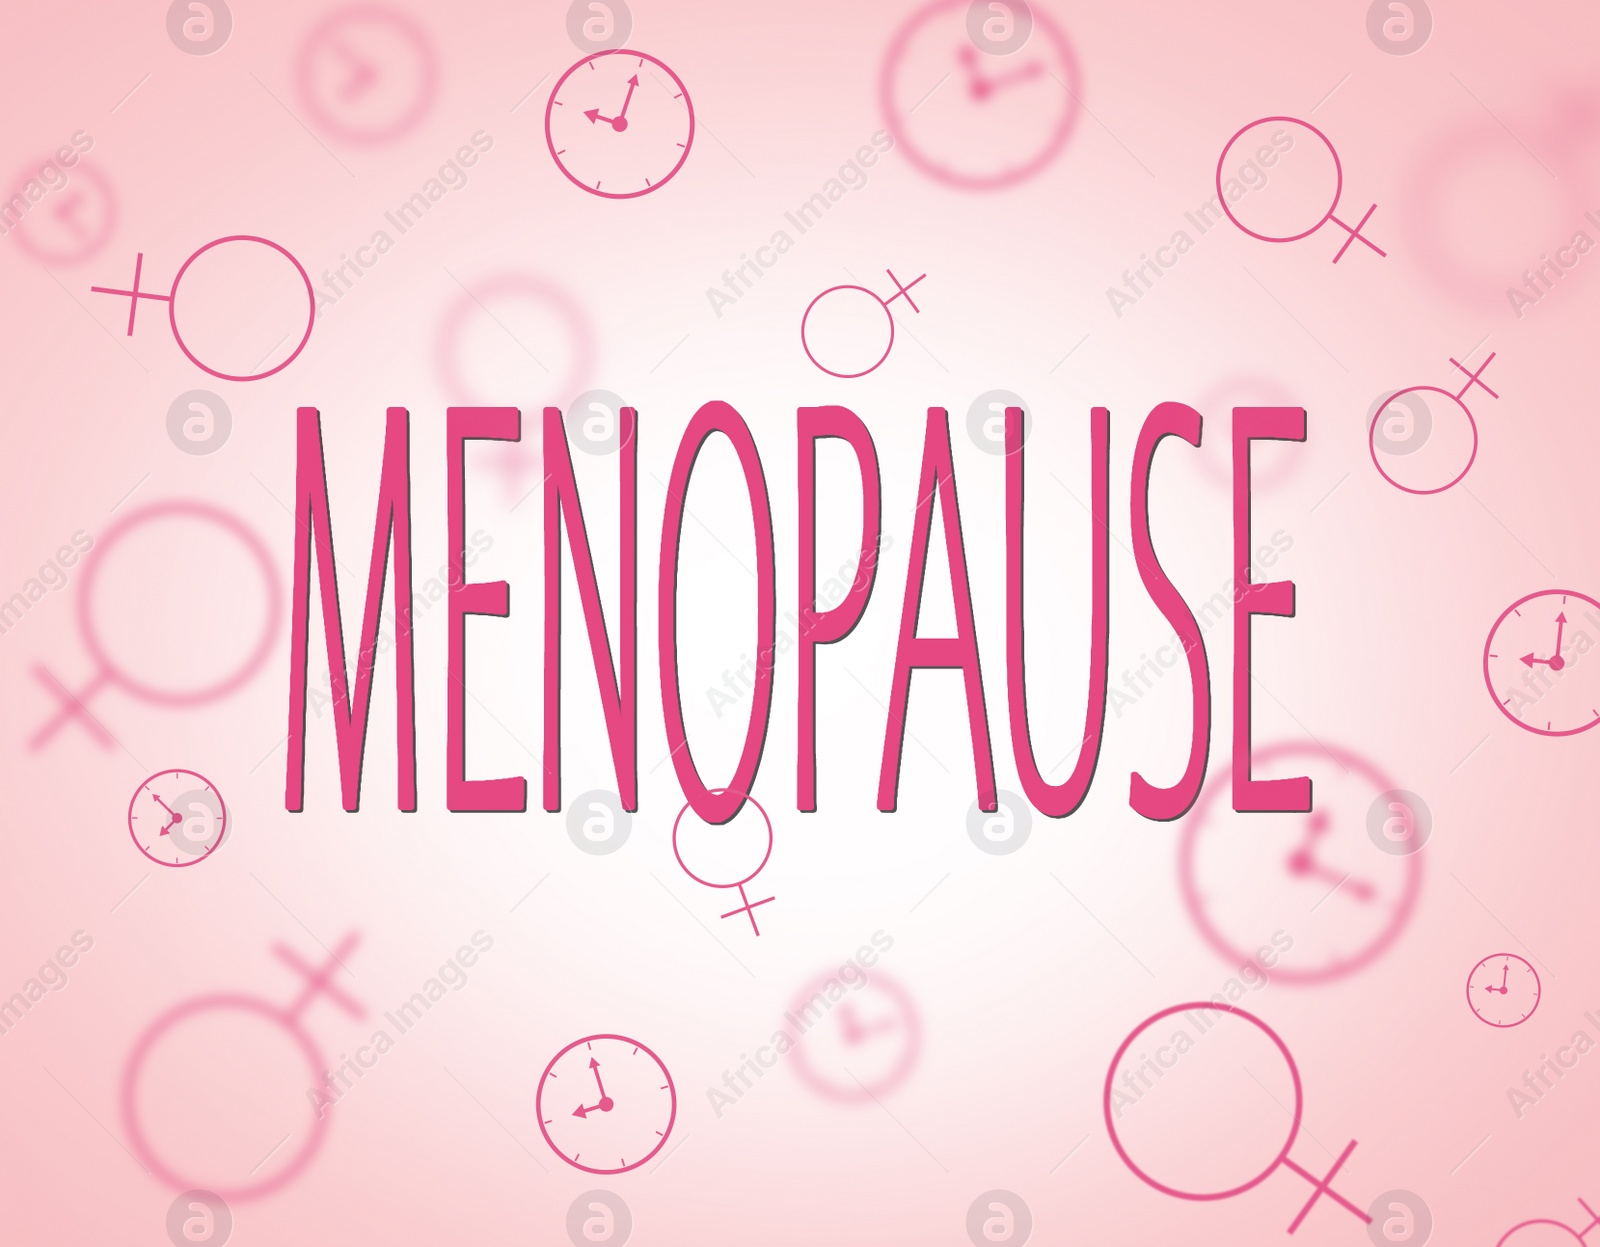 Illustration of Menstrual cycle. Word Menopause and illustrations of female gender symbol and clock on light pink background